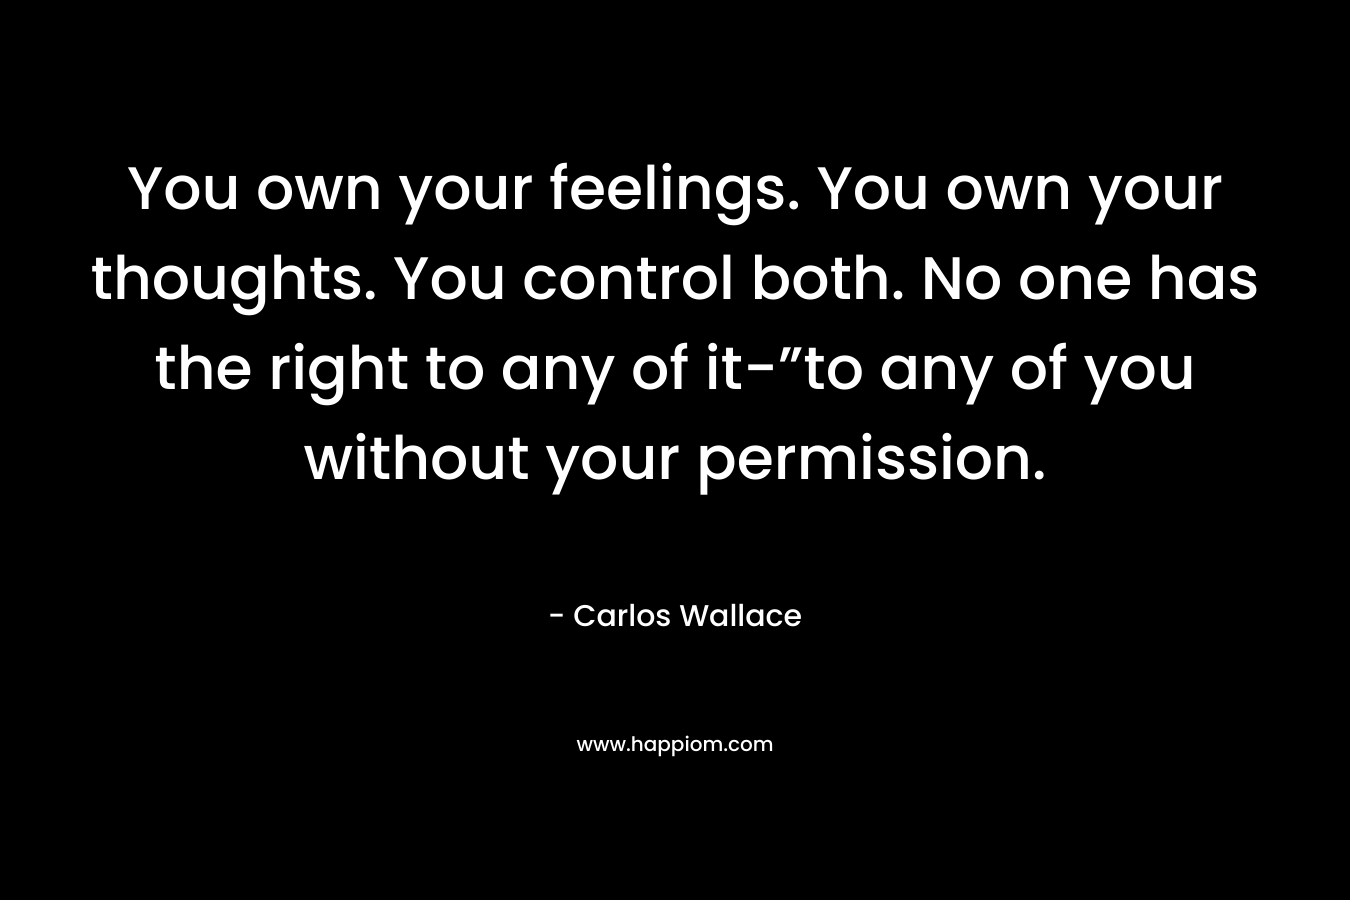 You own your feelings. You own your thoughts. You control both. No one has the right to any of it-”to any of you without your permission.